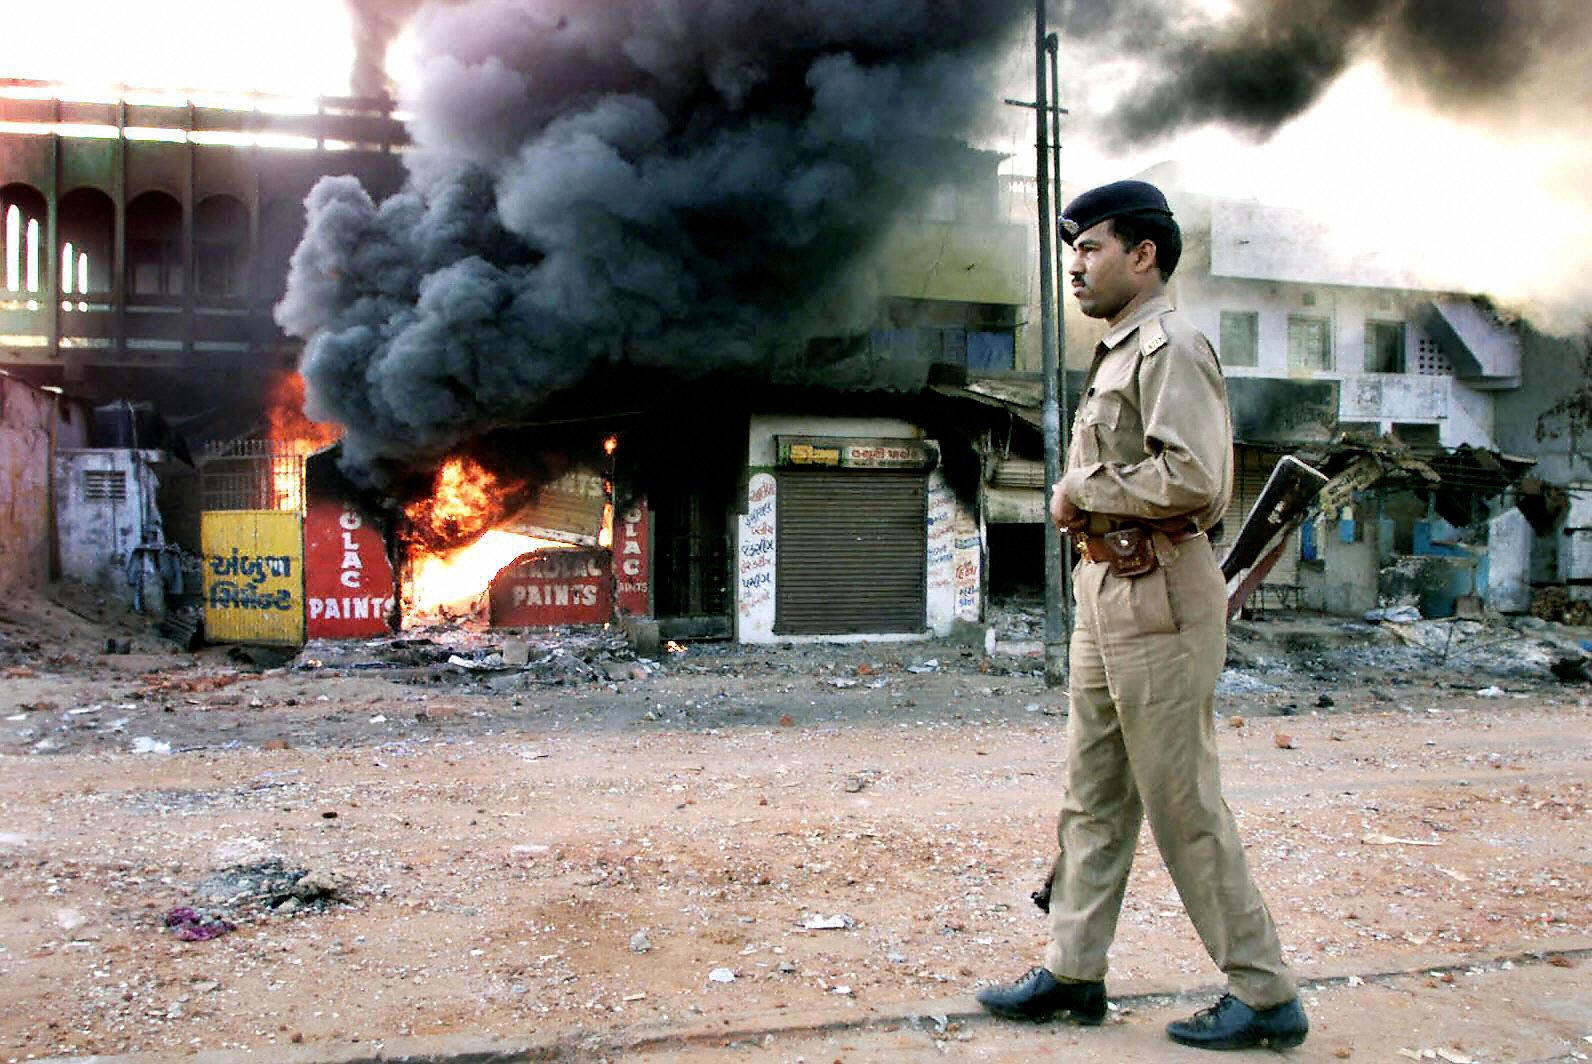 In this picture taken on 1 March 2002, an Indian policeman looks on as a row of shops burn during the Gujarat riots